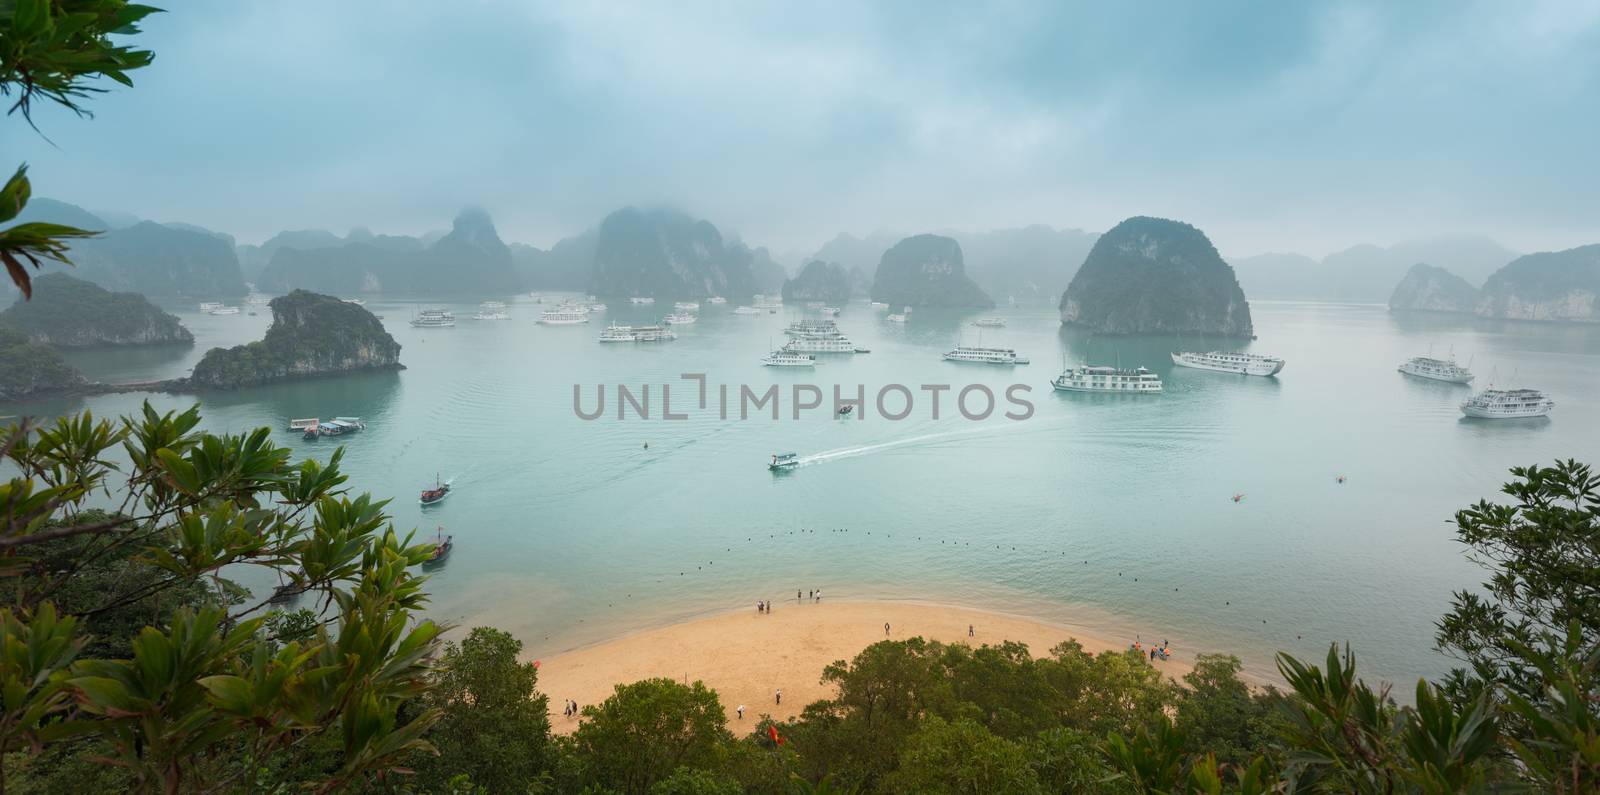 Panorama of Halong Bay in Vietnam with green leaves and beach in foreground. Cliffs and rocks standing out of water with boats floating around. Light fog in distance. Popular travel destination.